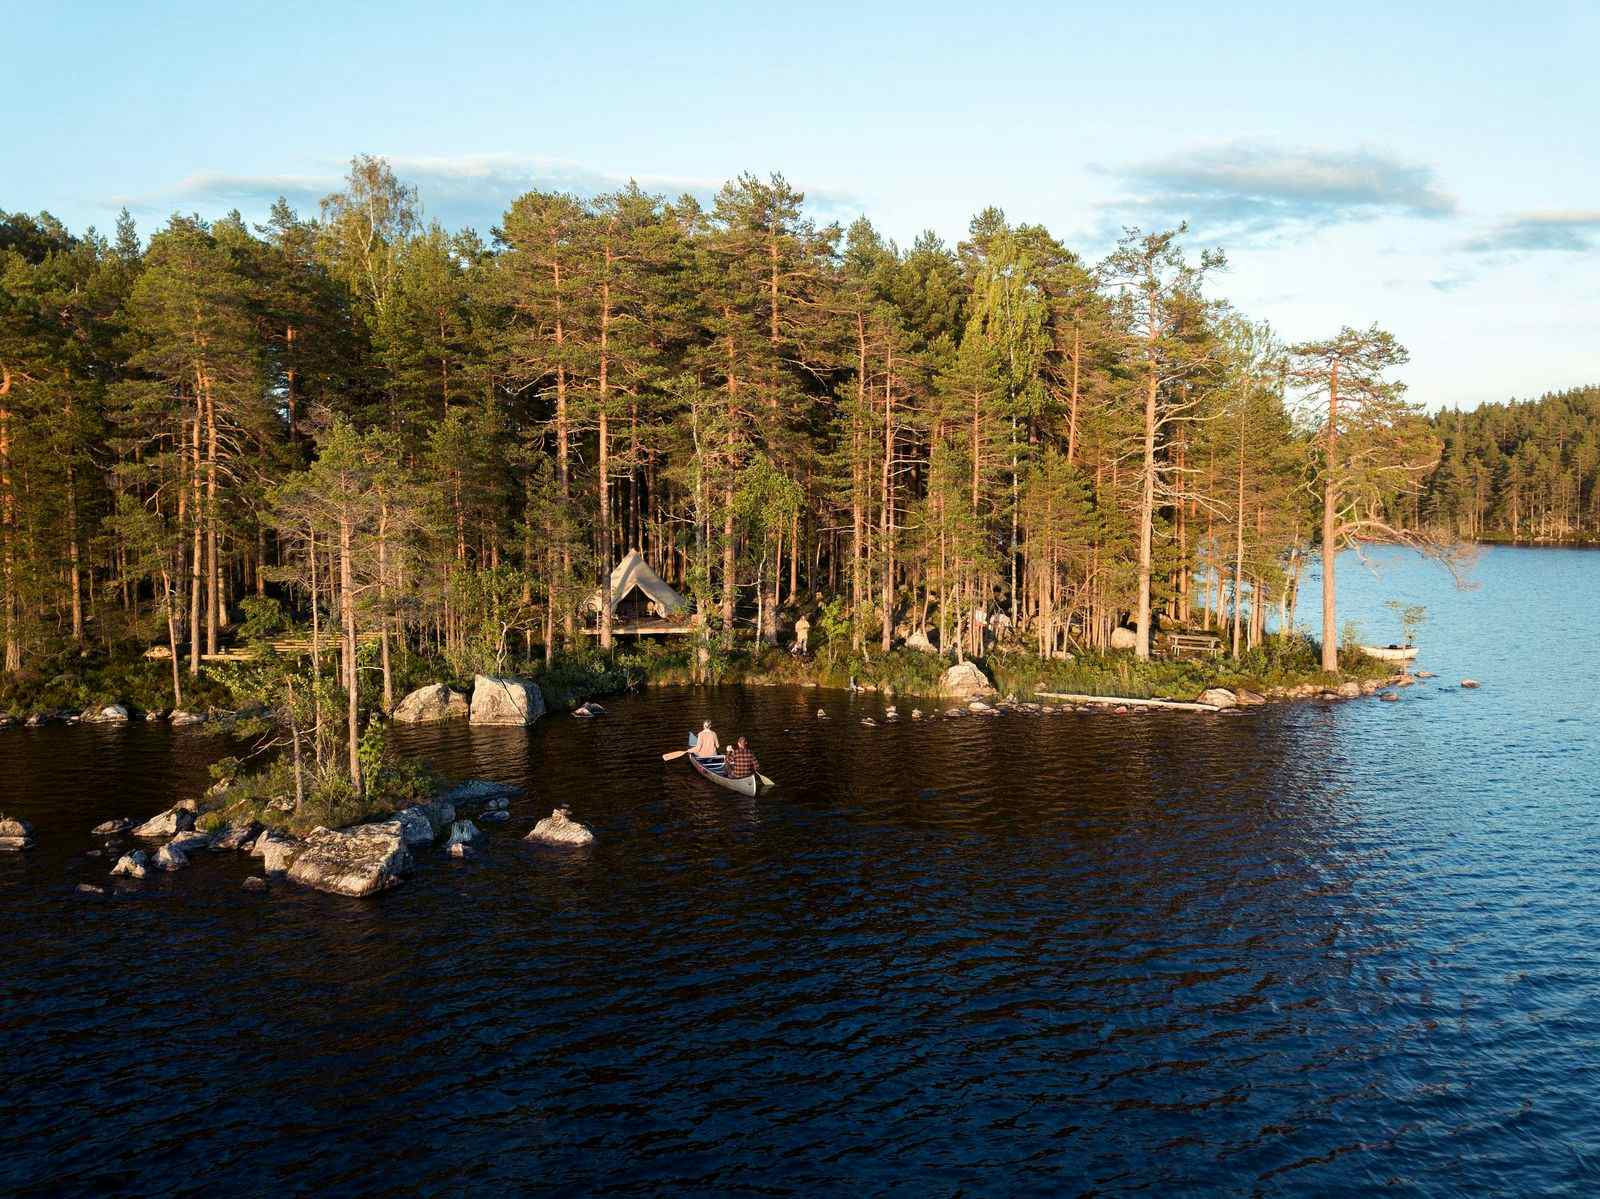 The Wolf Forests of Sweden Threatened by Onshore Wind Farms